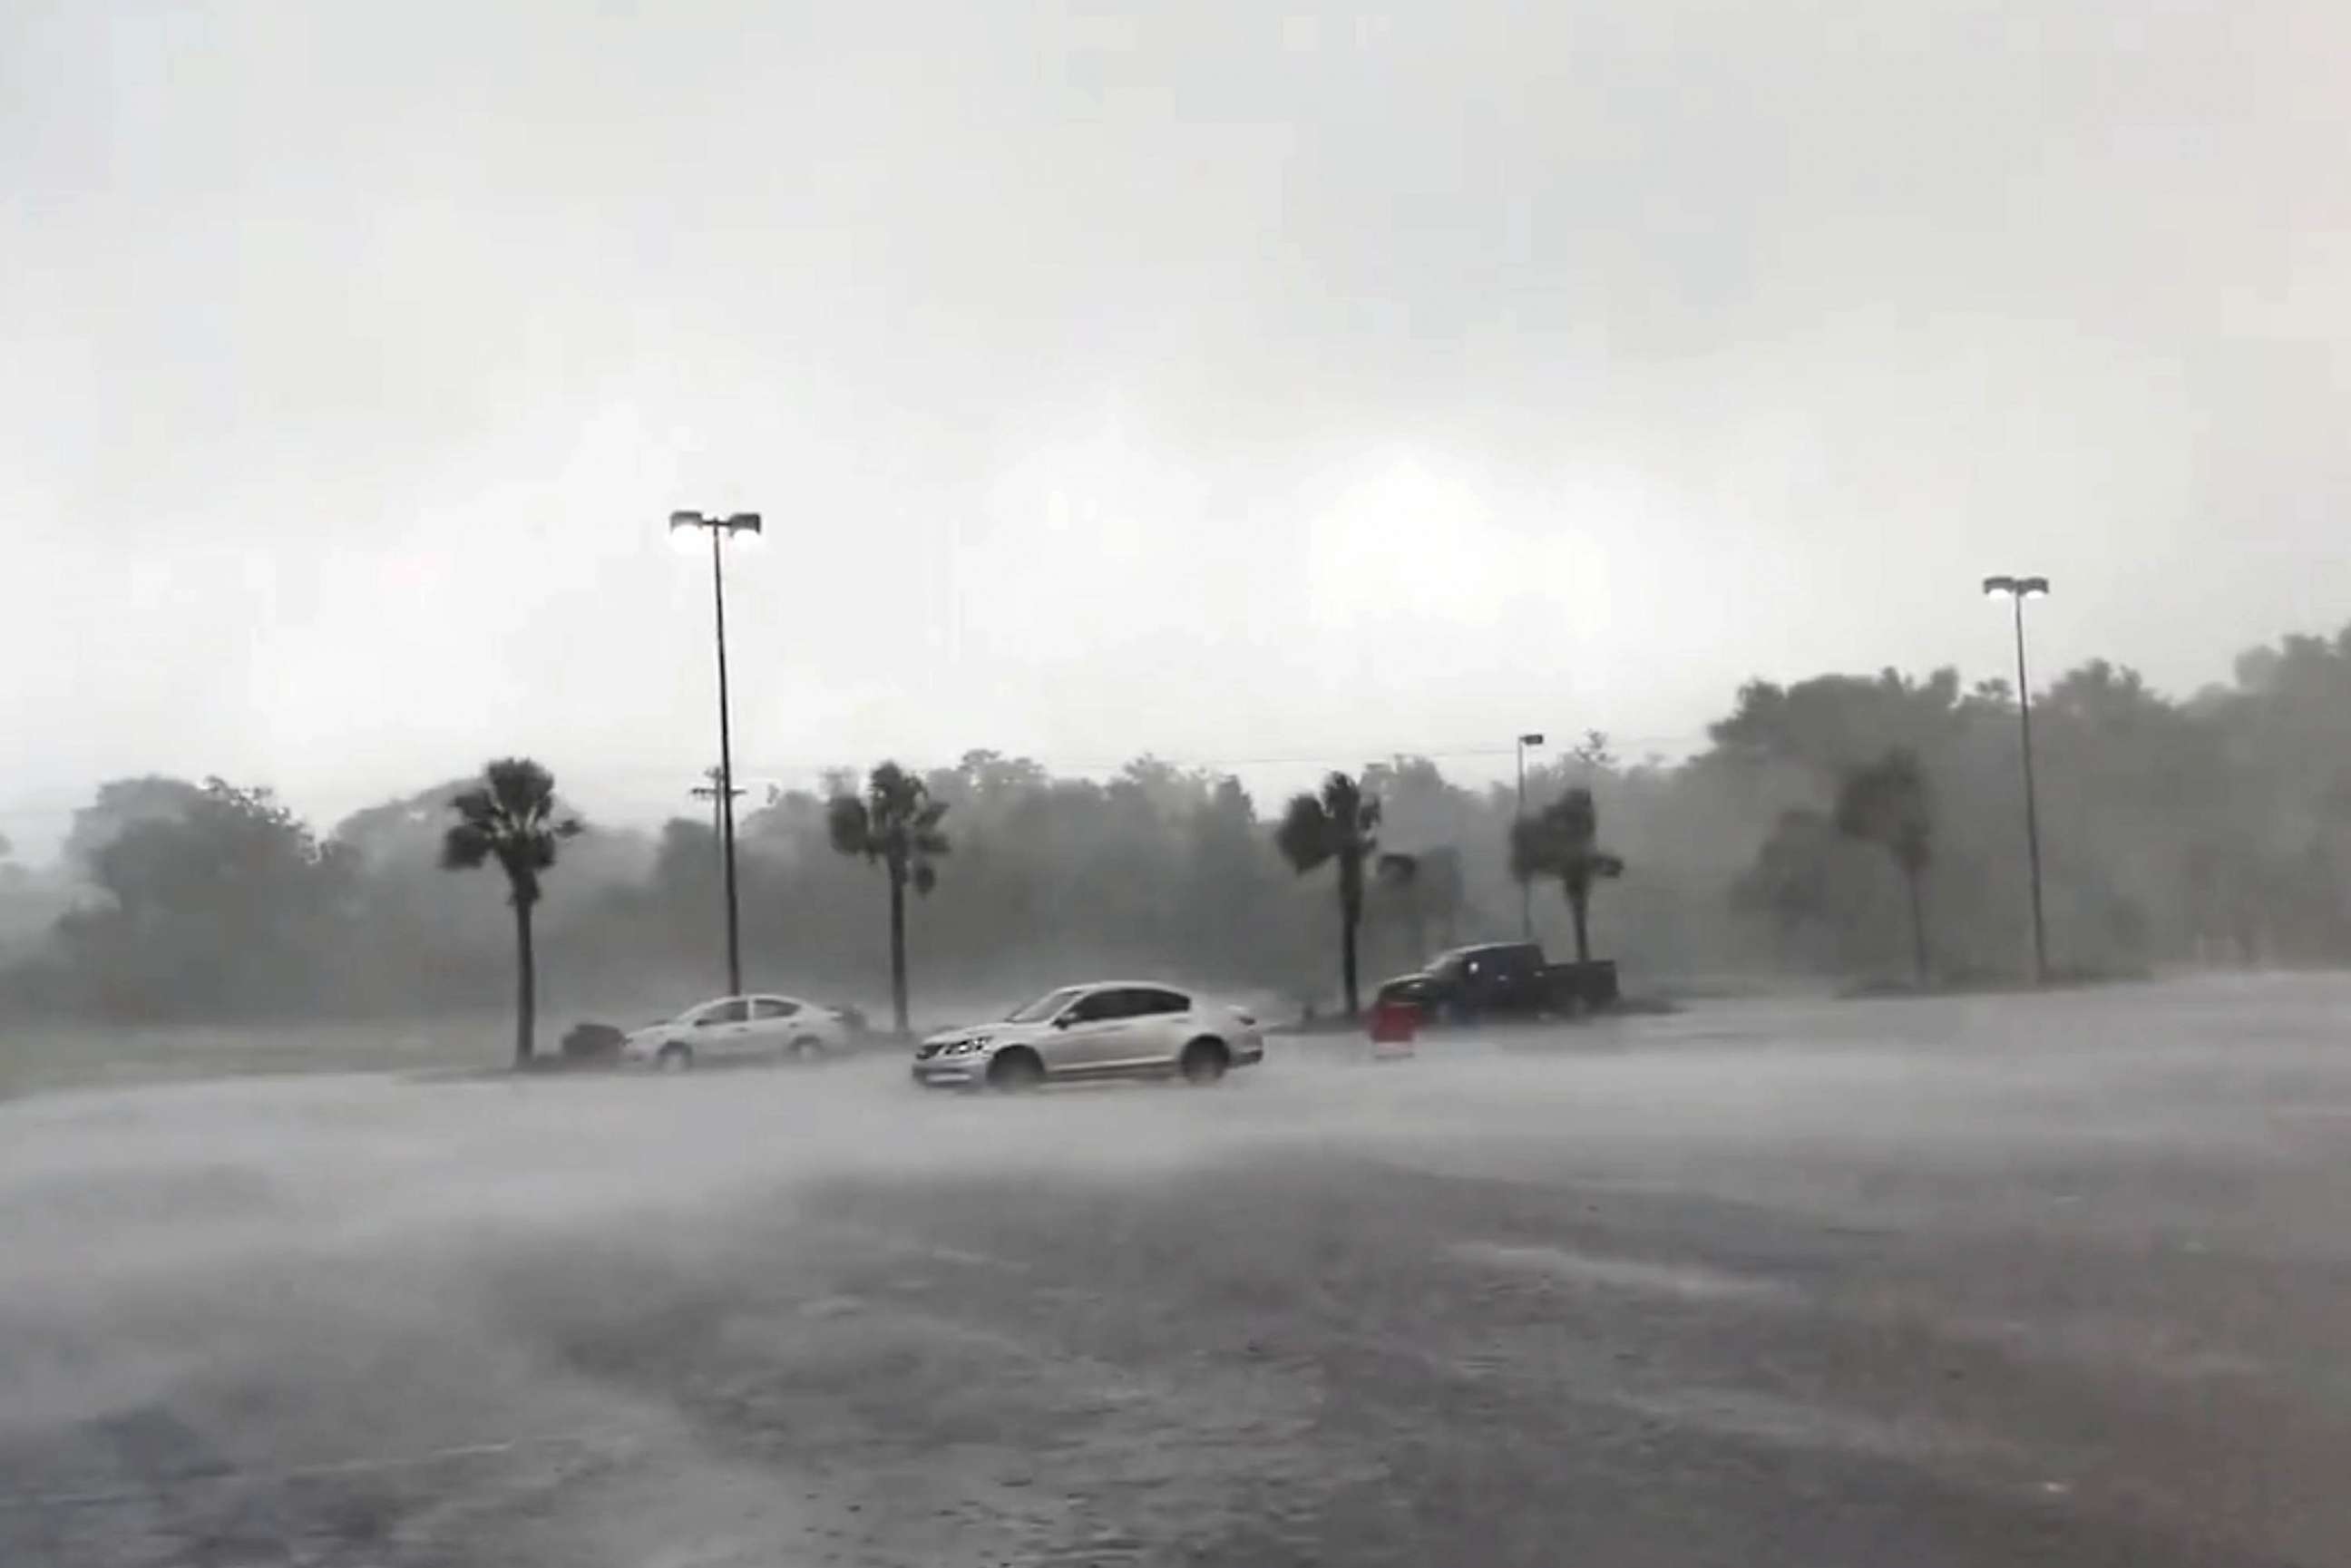 PHOTO: Heavy wind in Tallahassee Florida